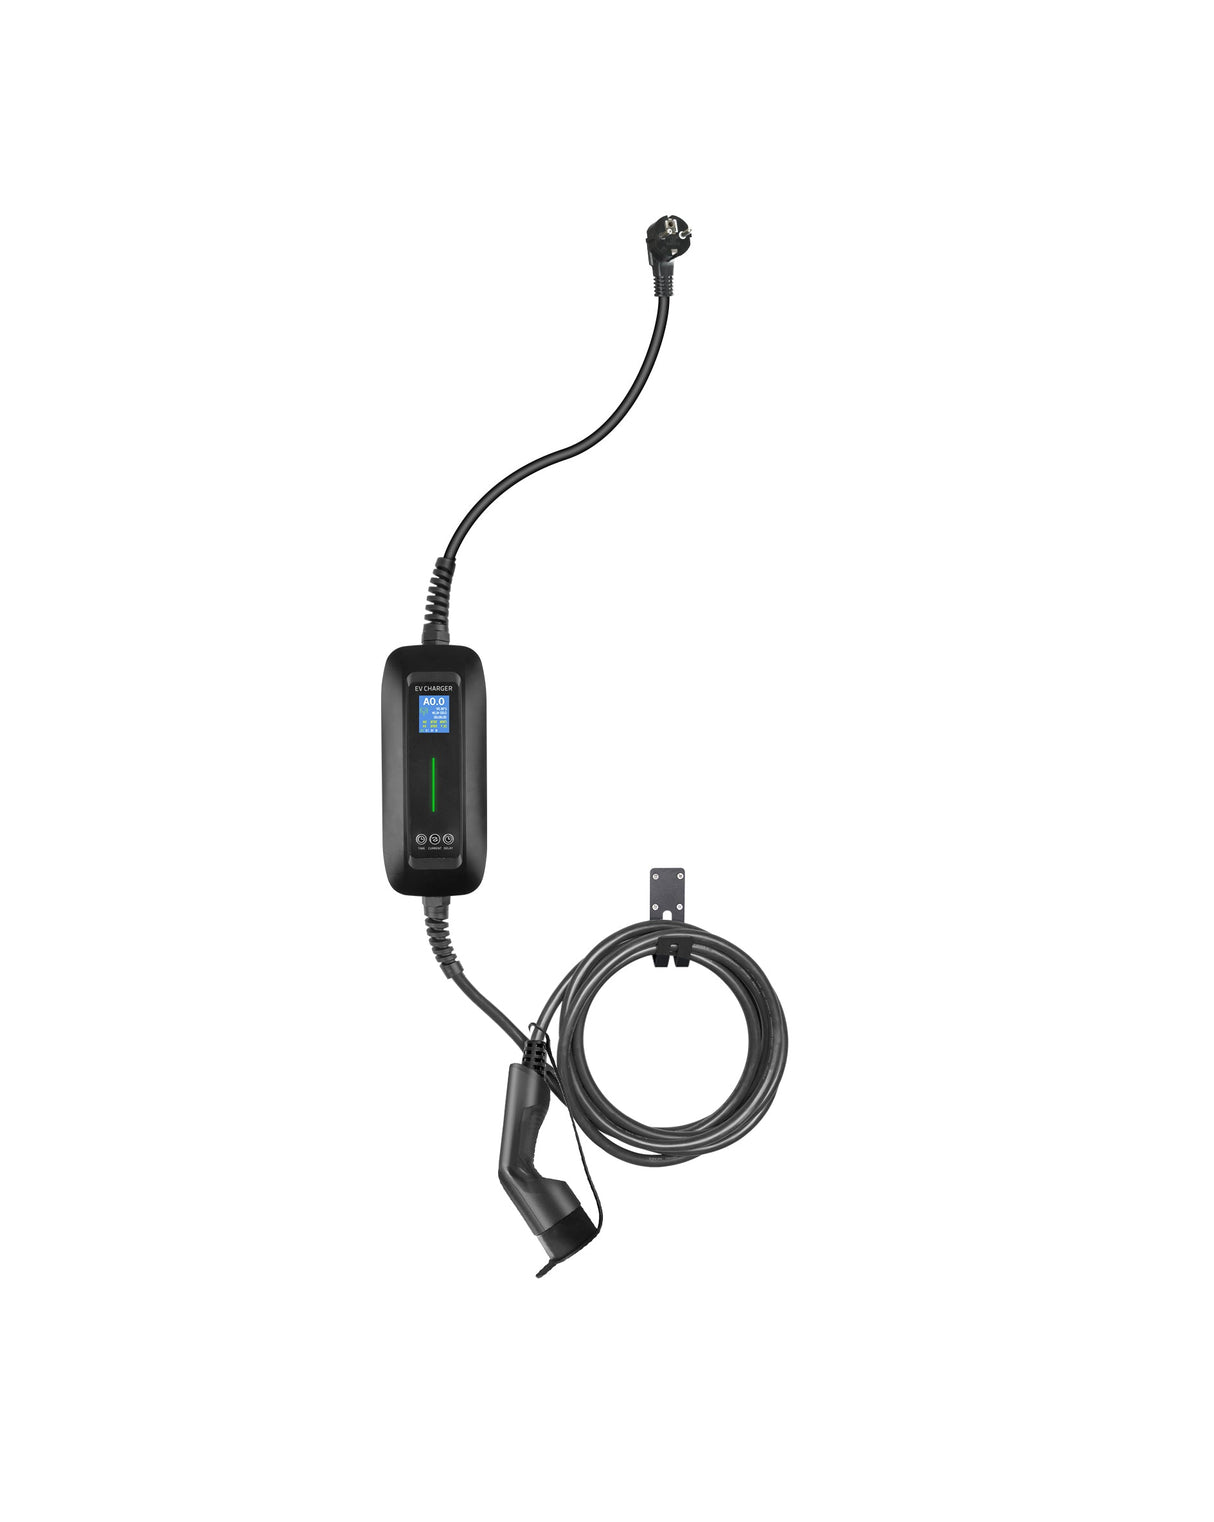 Mobile Charger Renault Twingo - LCD Black Type 2 to Schuko - Delayed charging and Memory function